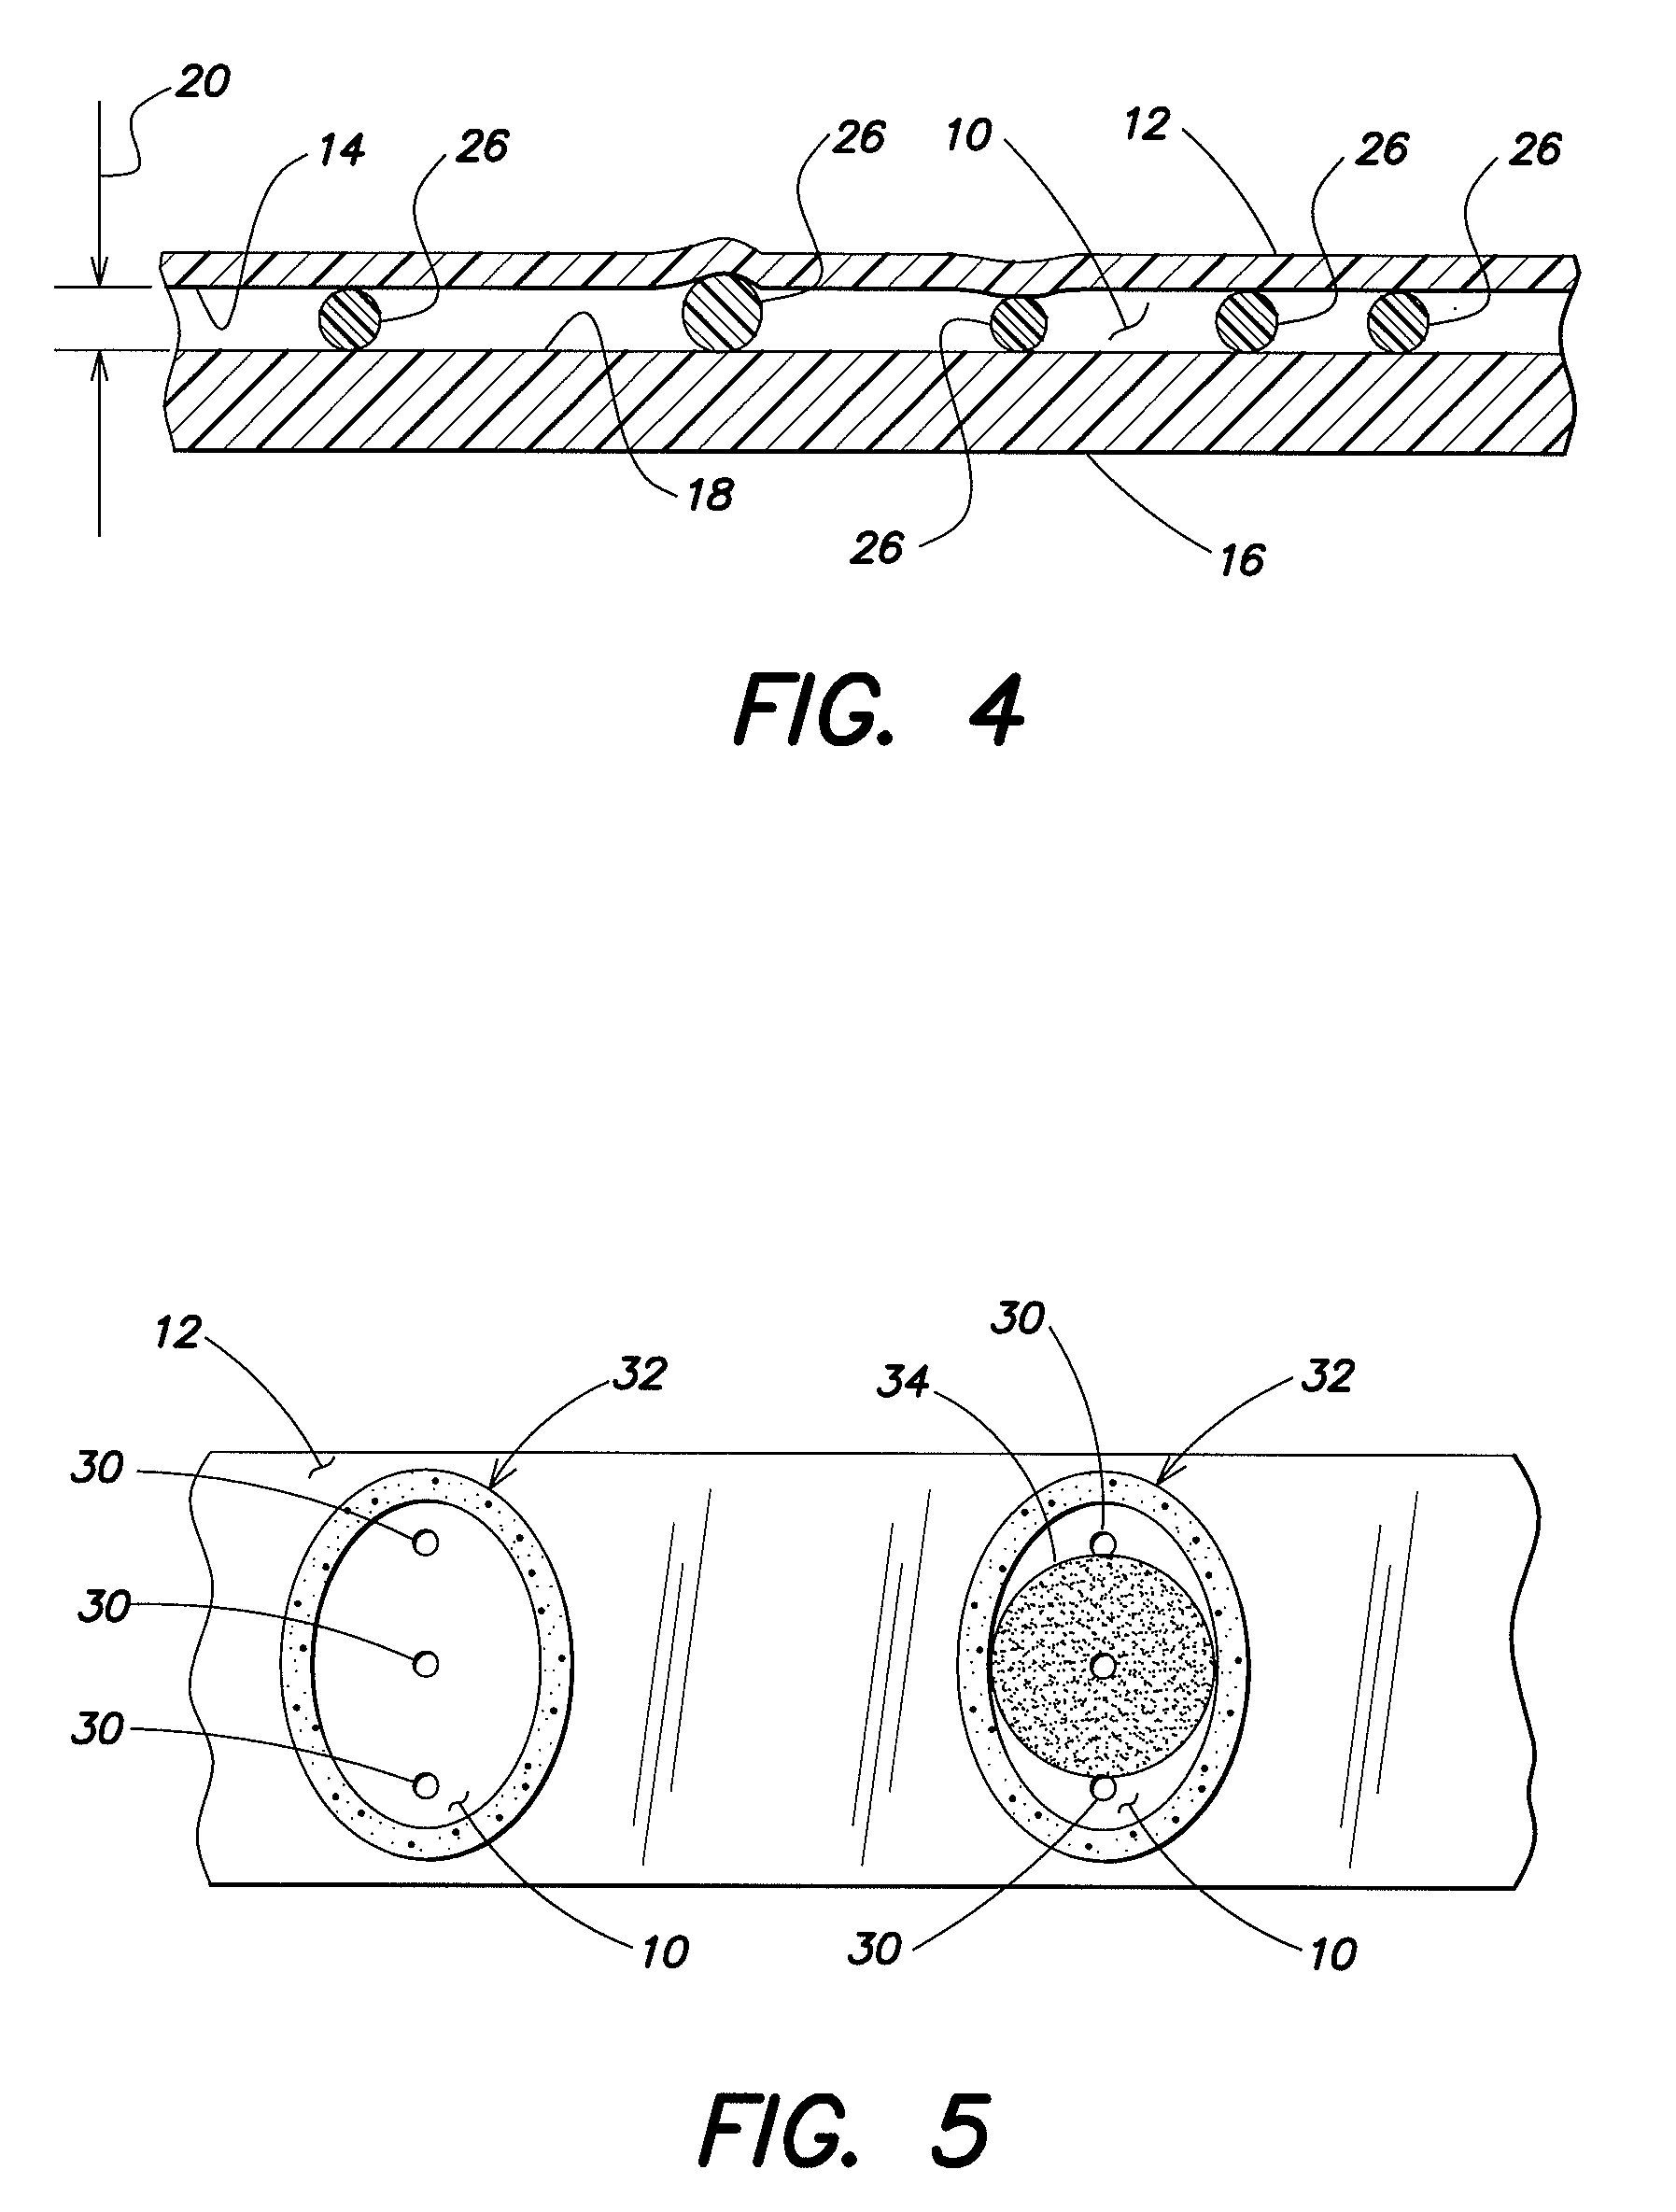 Method and apparatus for detecting and counting platelets individually and in aggregate clumps